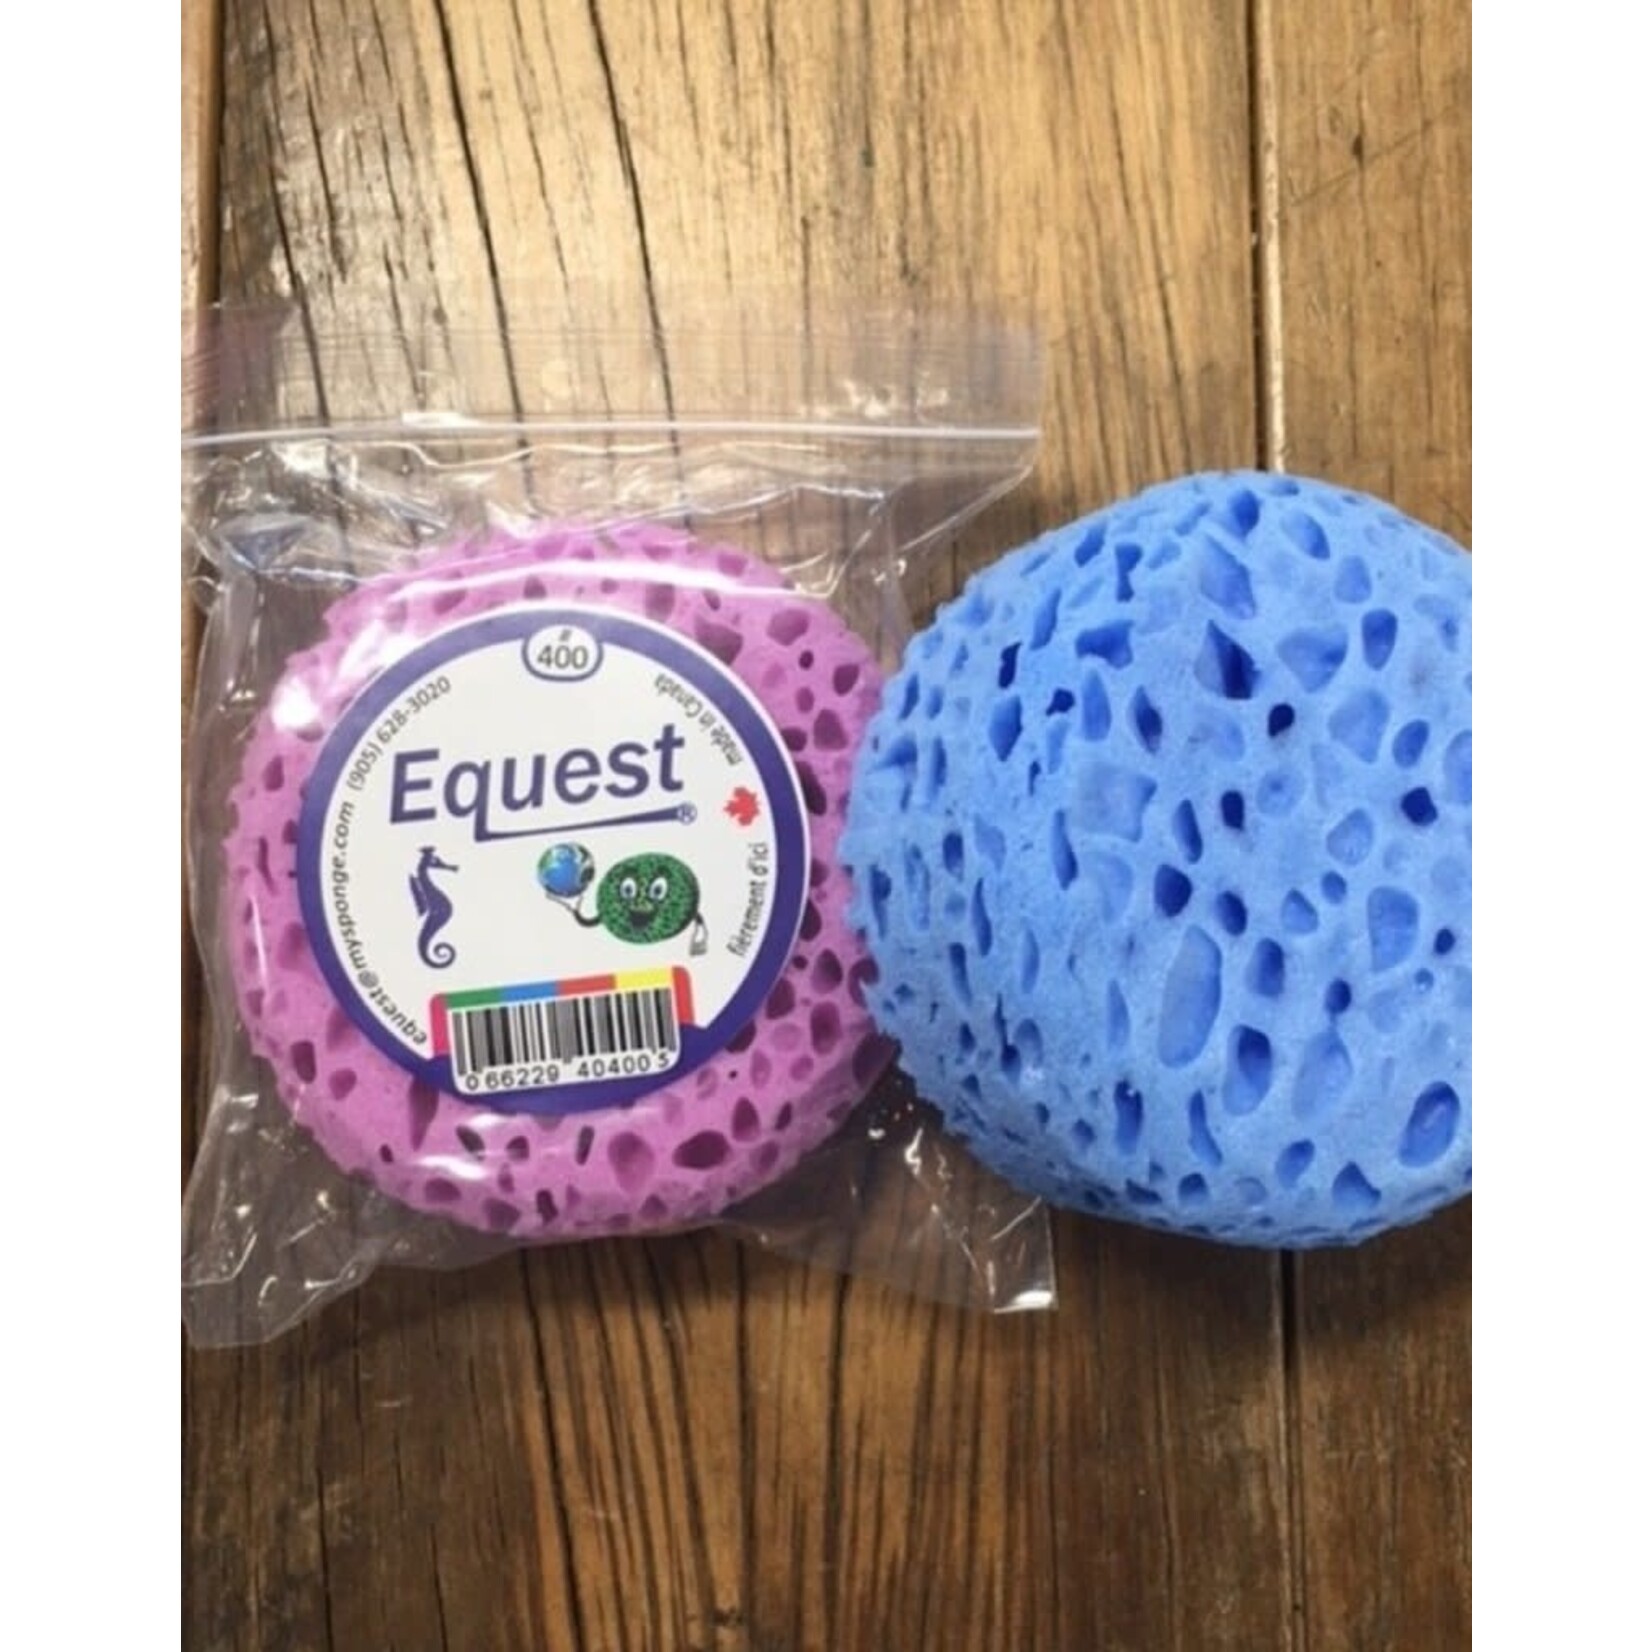 Small Round Sponge - Assorted Colors